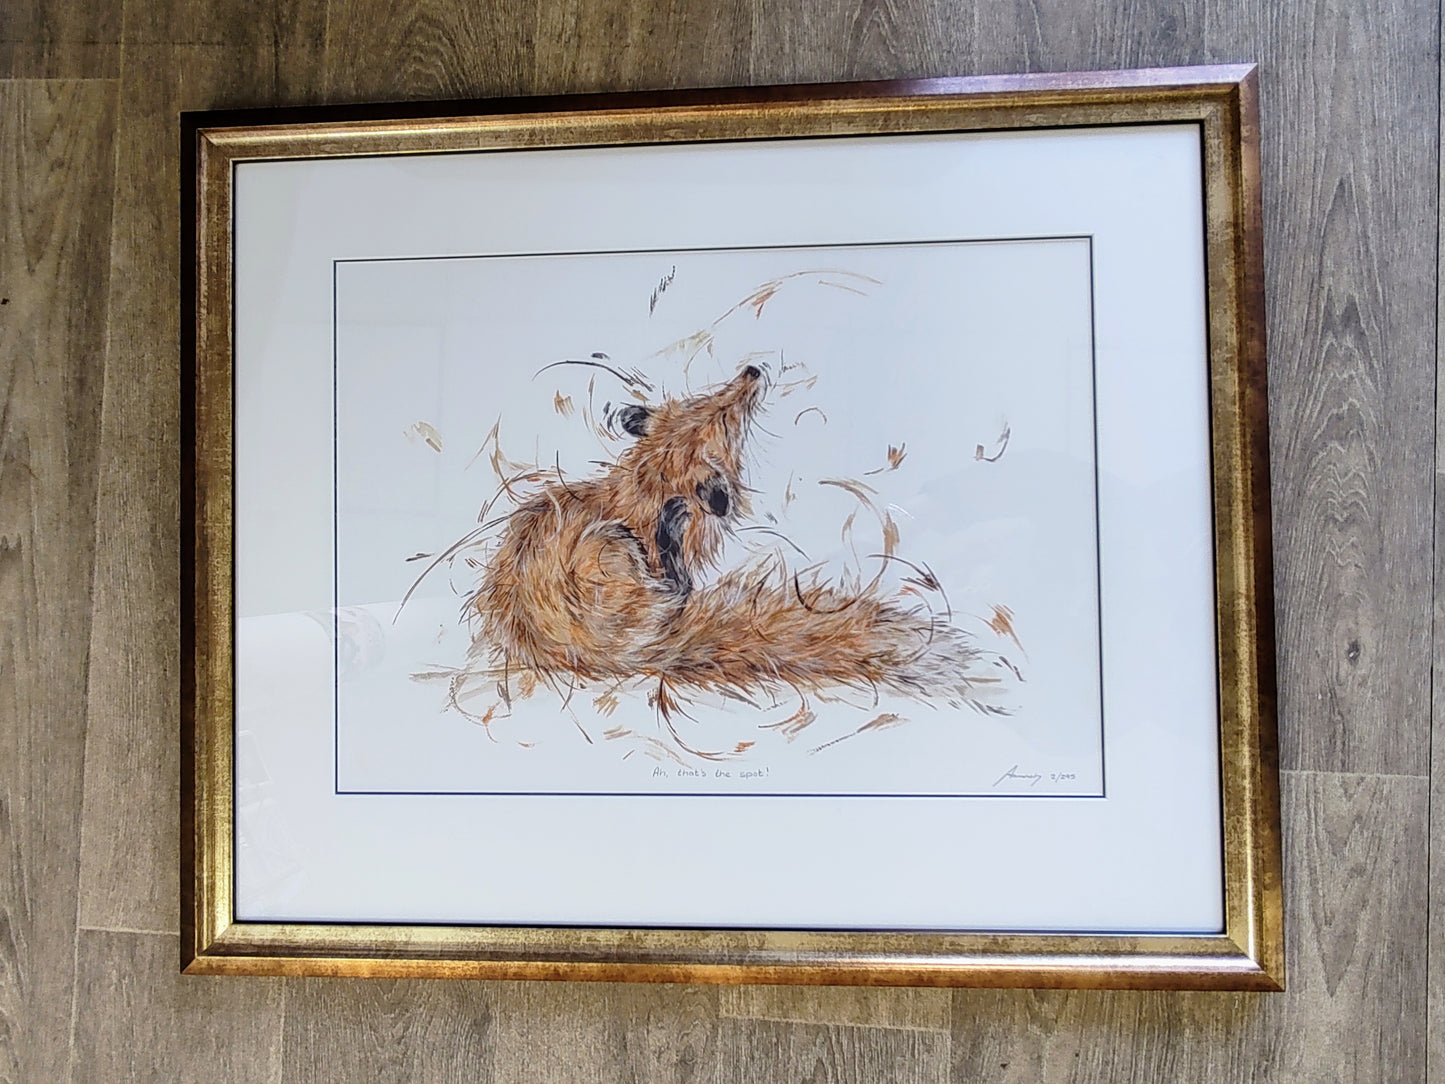 Aaminah Snowdon- Ah, that's the spot! Limited Edition Framed Print of a Cute Fox